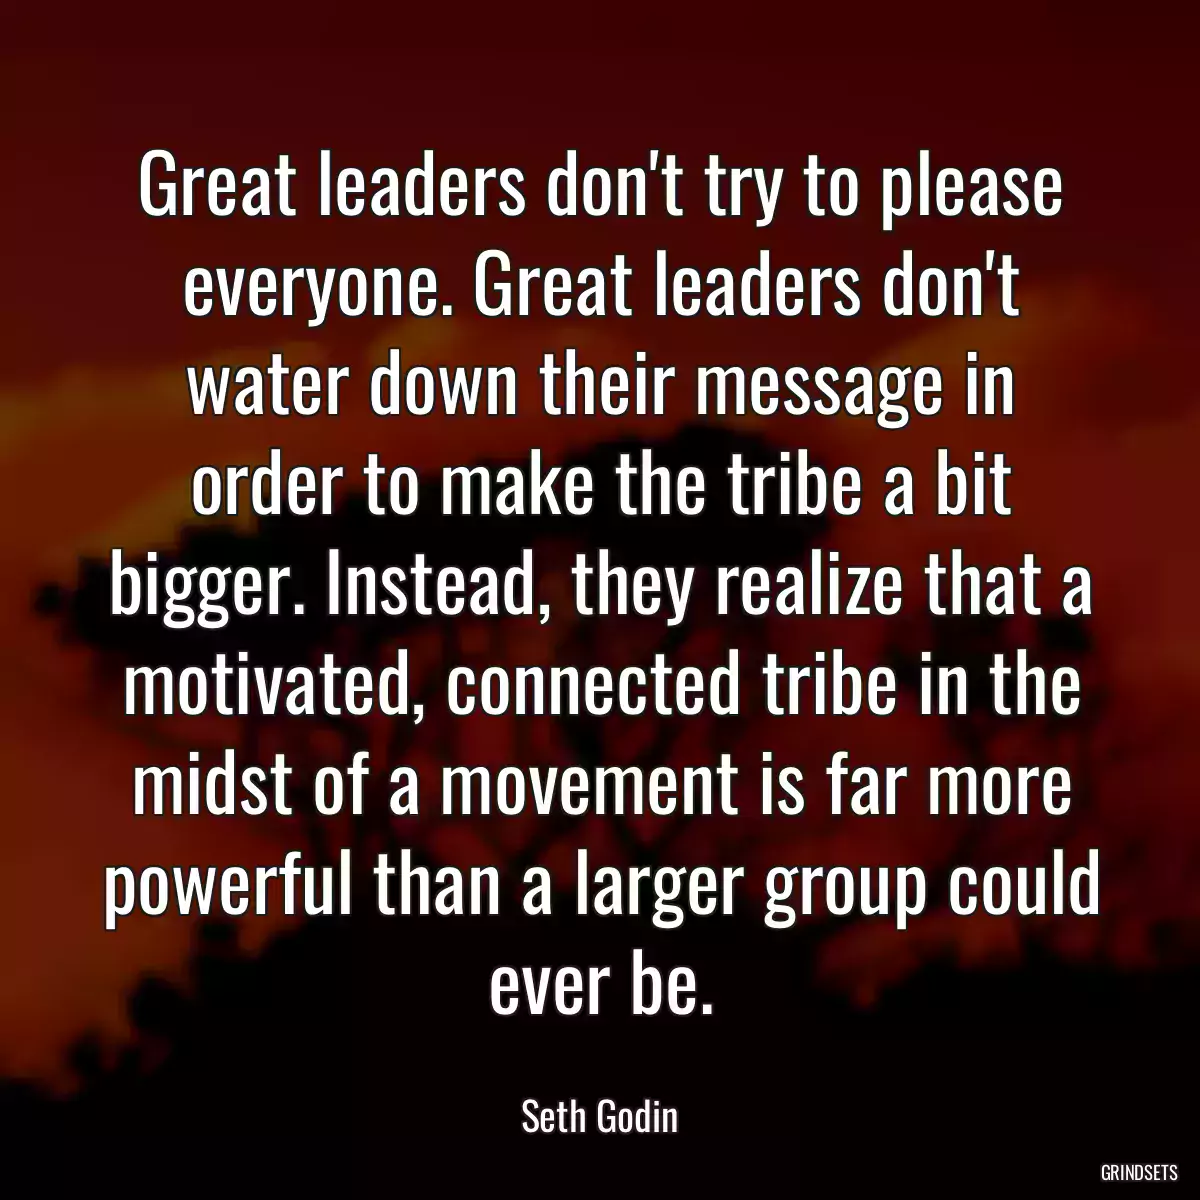 Great leaders don\'t try to please everyone. Great leaders don\'t water down their message in order to make the tribe a bit bigger. Instead, they realize that a motivated, connected tribe in the midst of a movement is far more powerful than a larger group could ever be.